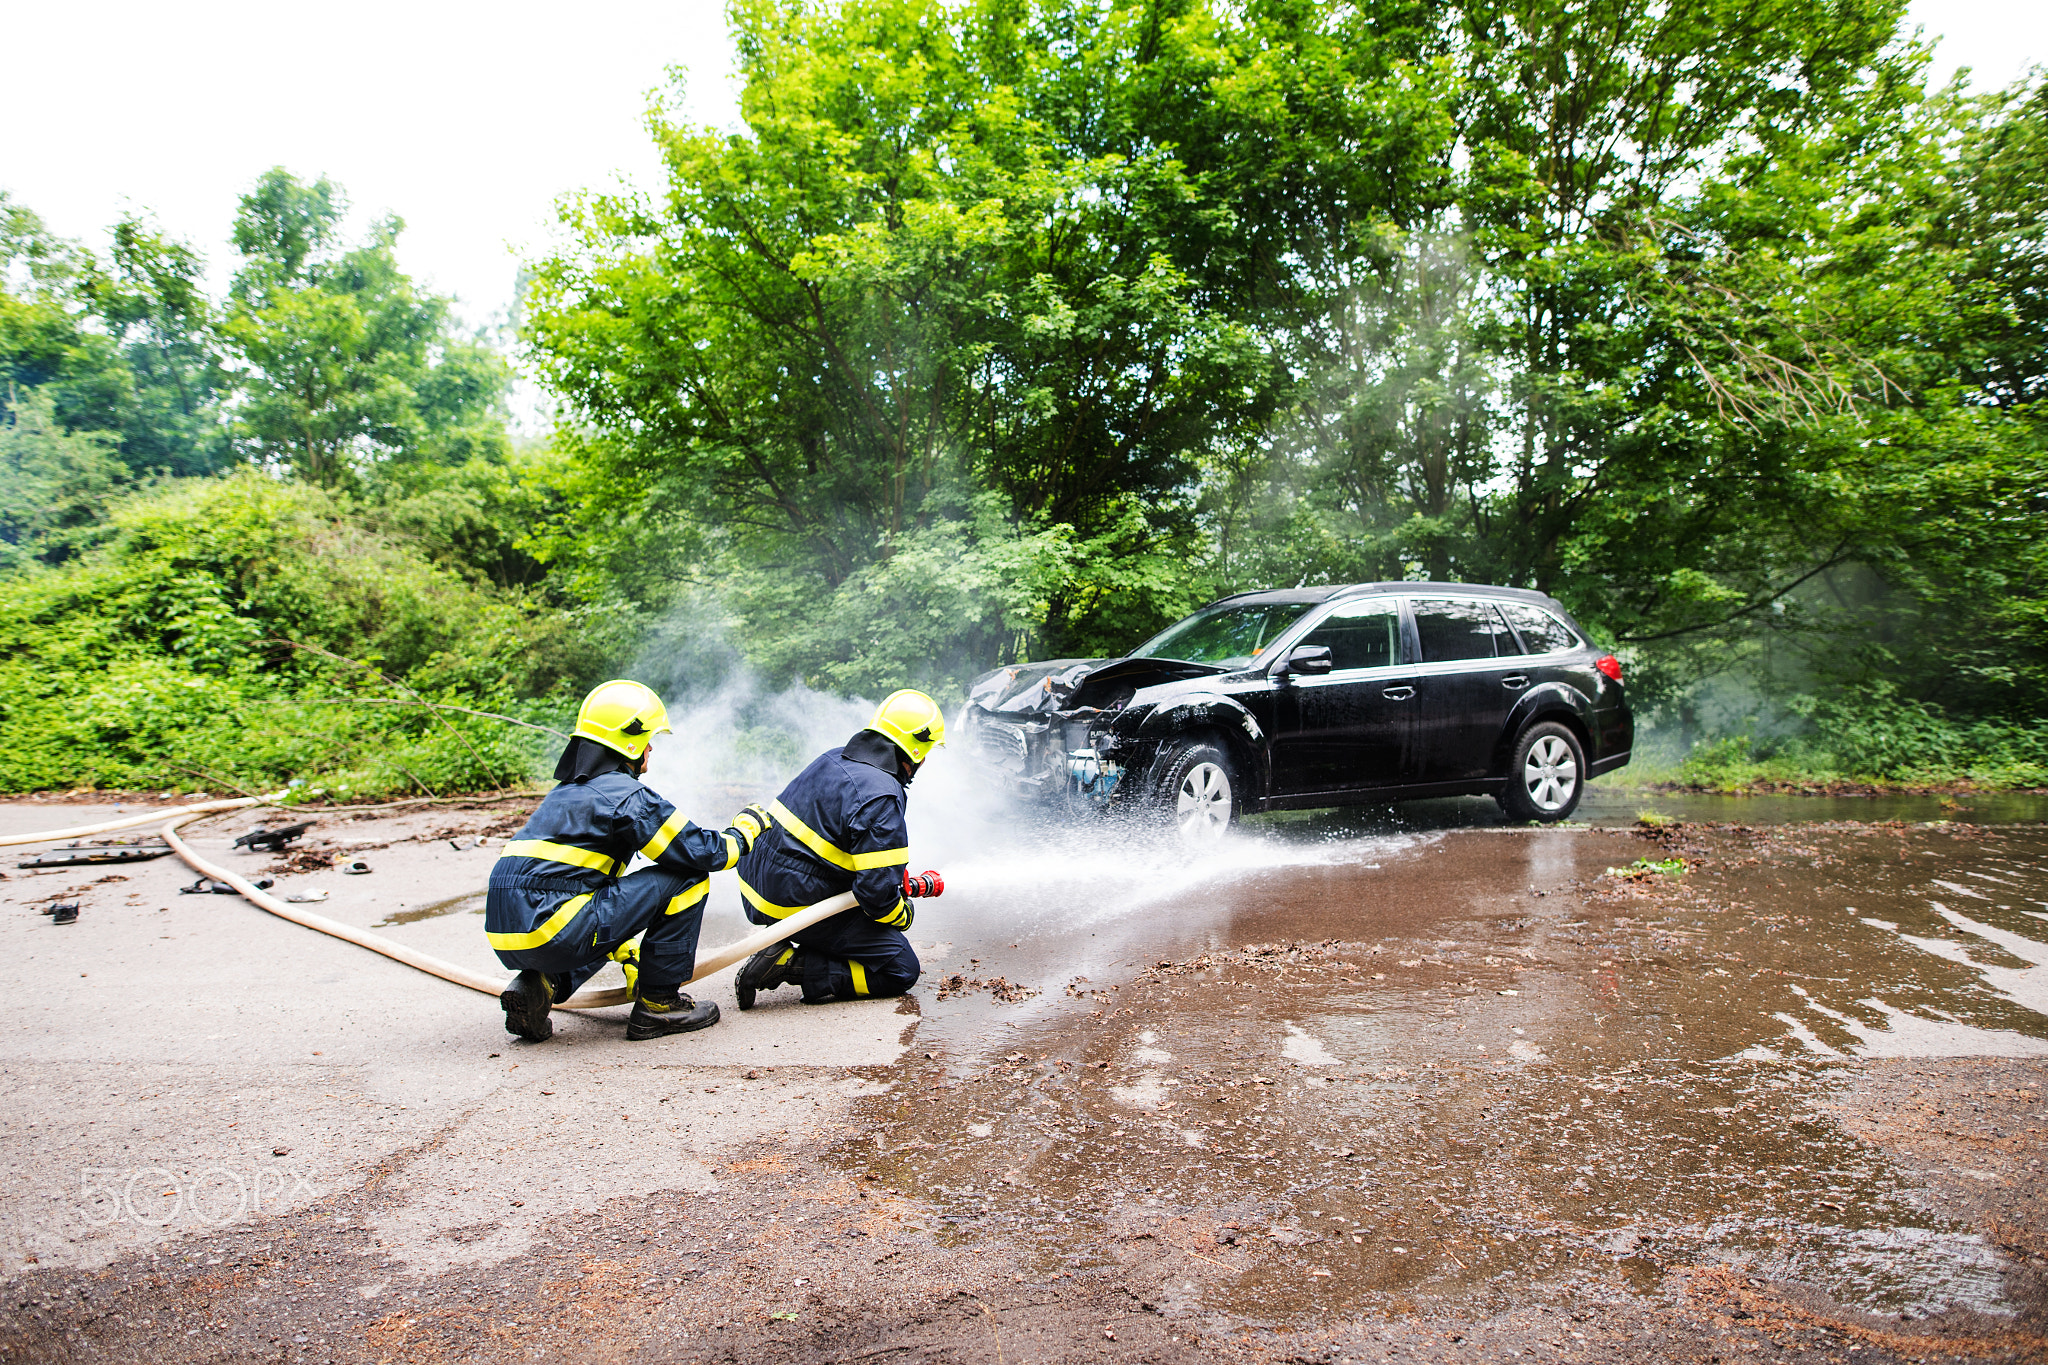 Two firefighters extinguishing a burning car after an accident.